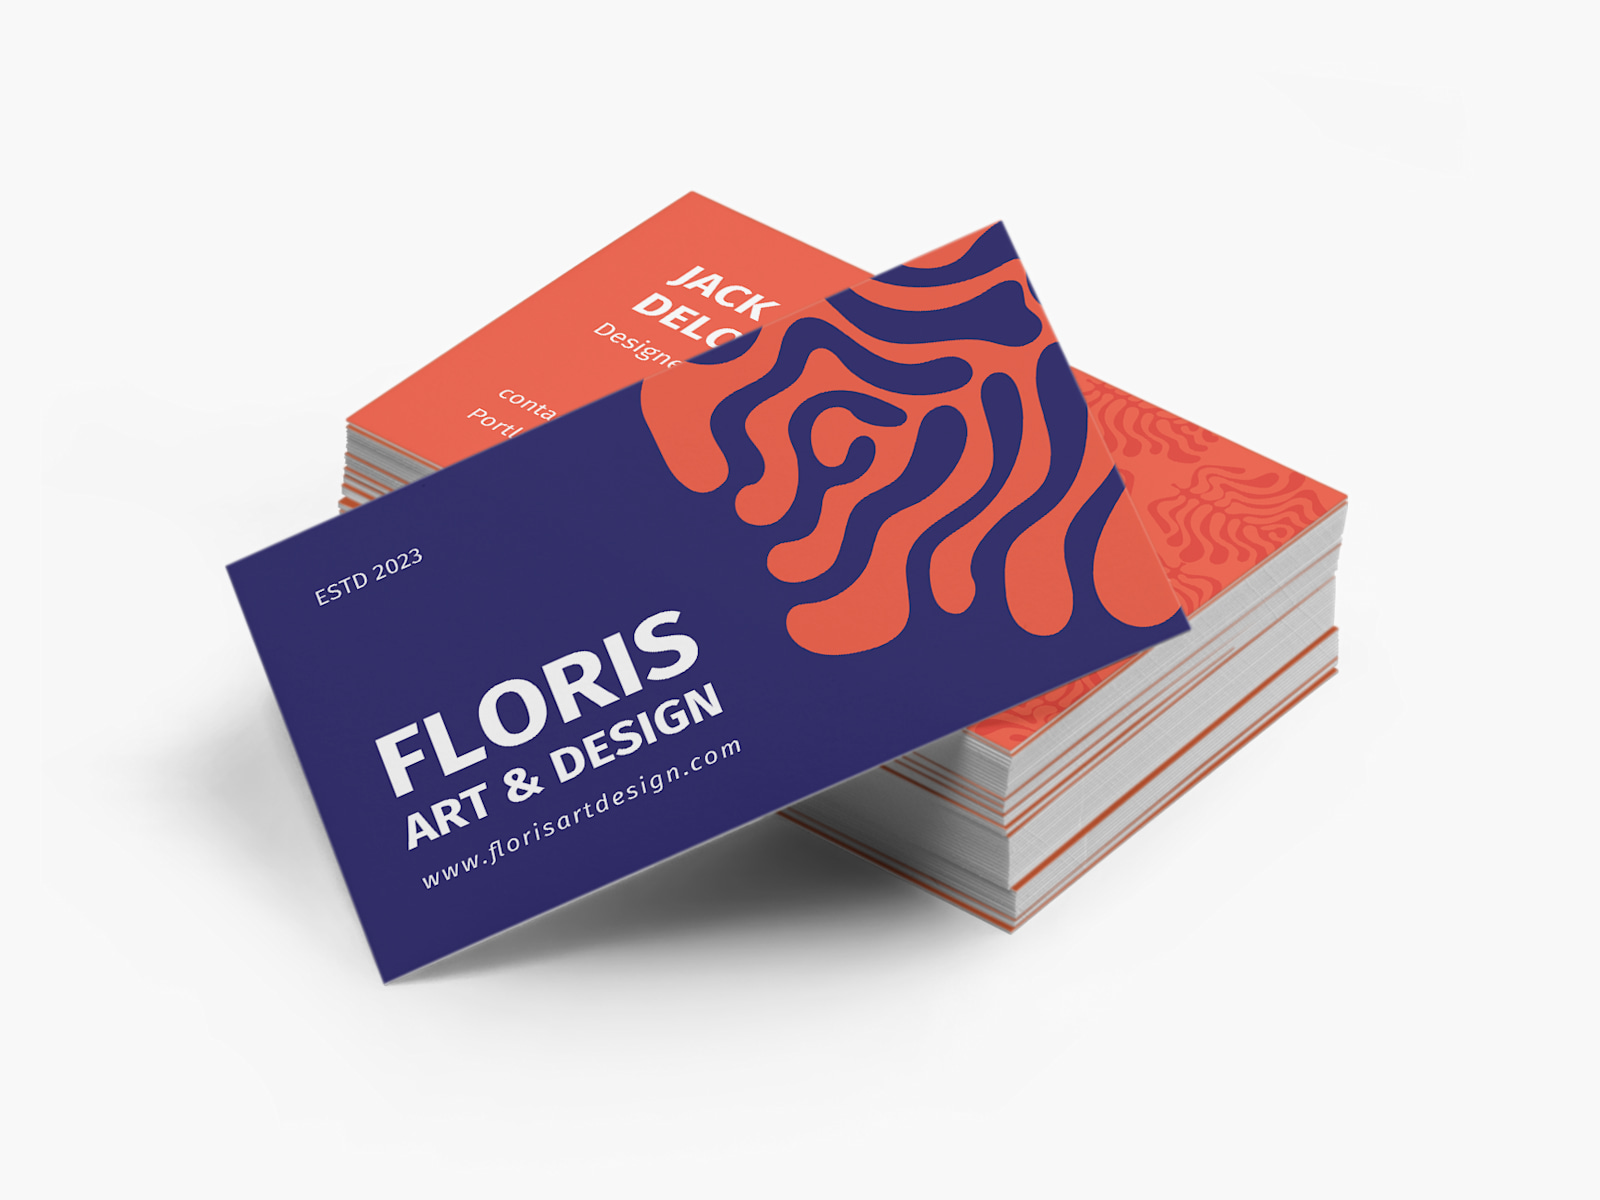 Larger version: A standard business card with a purple and orange design.